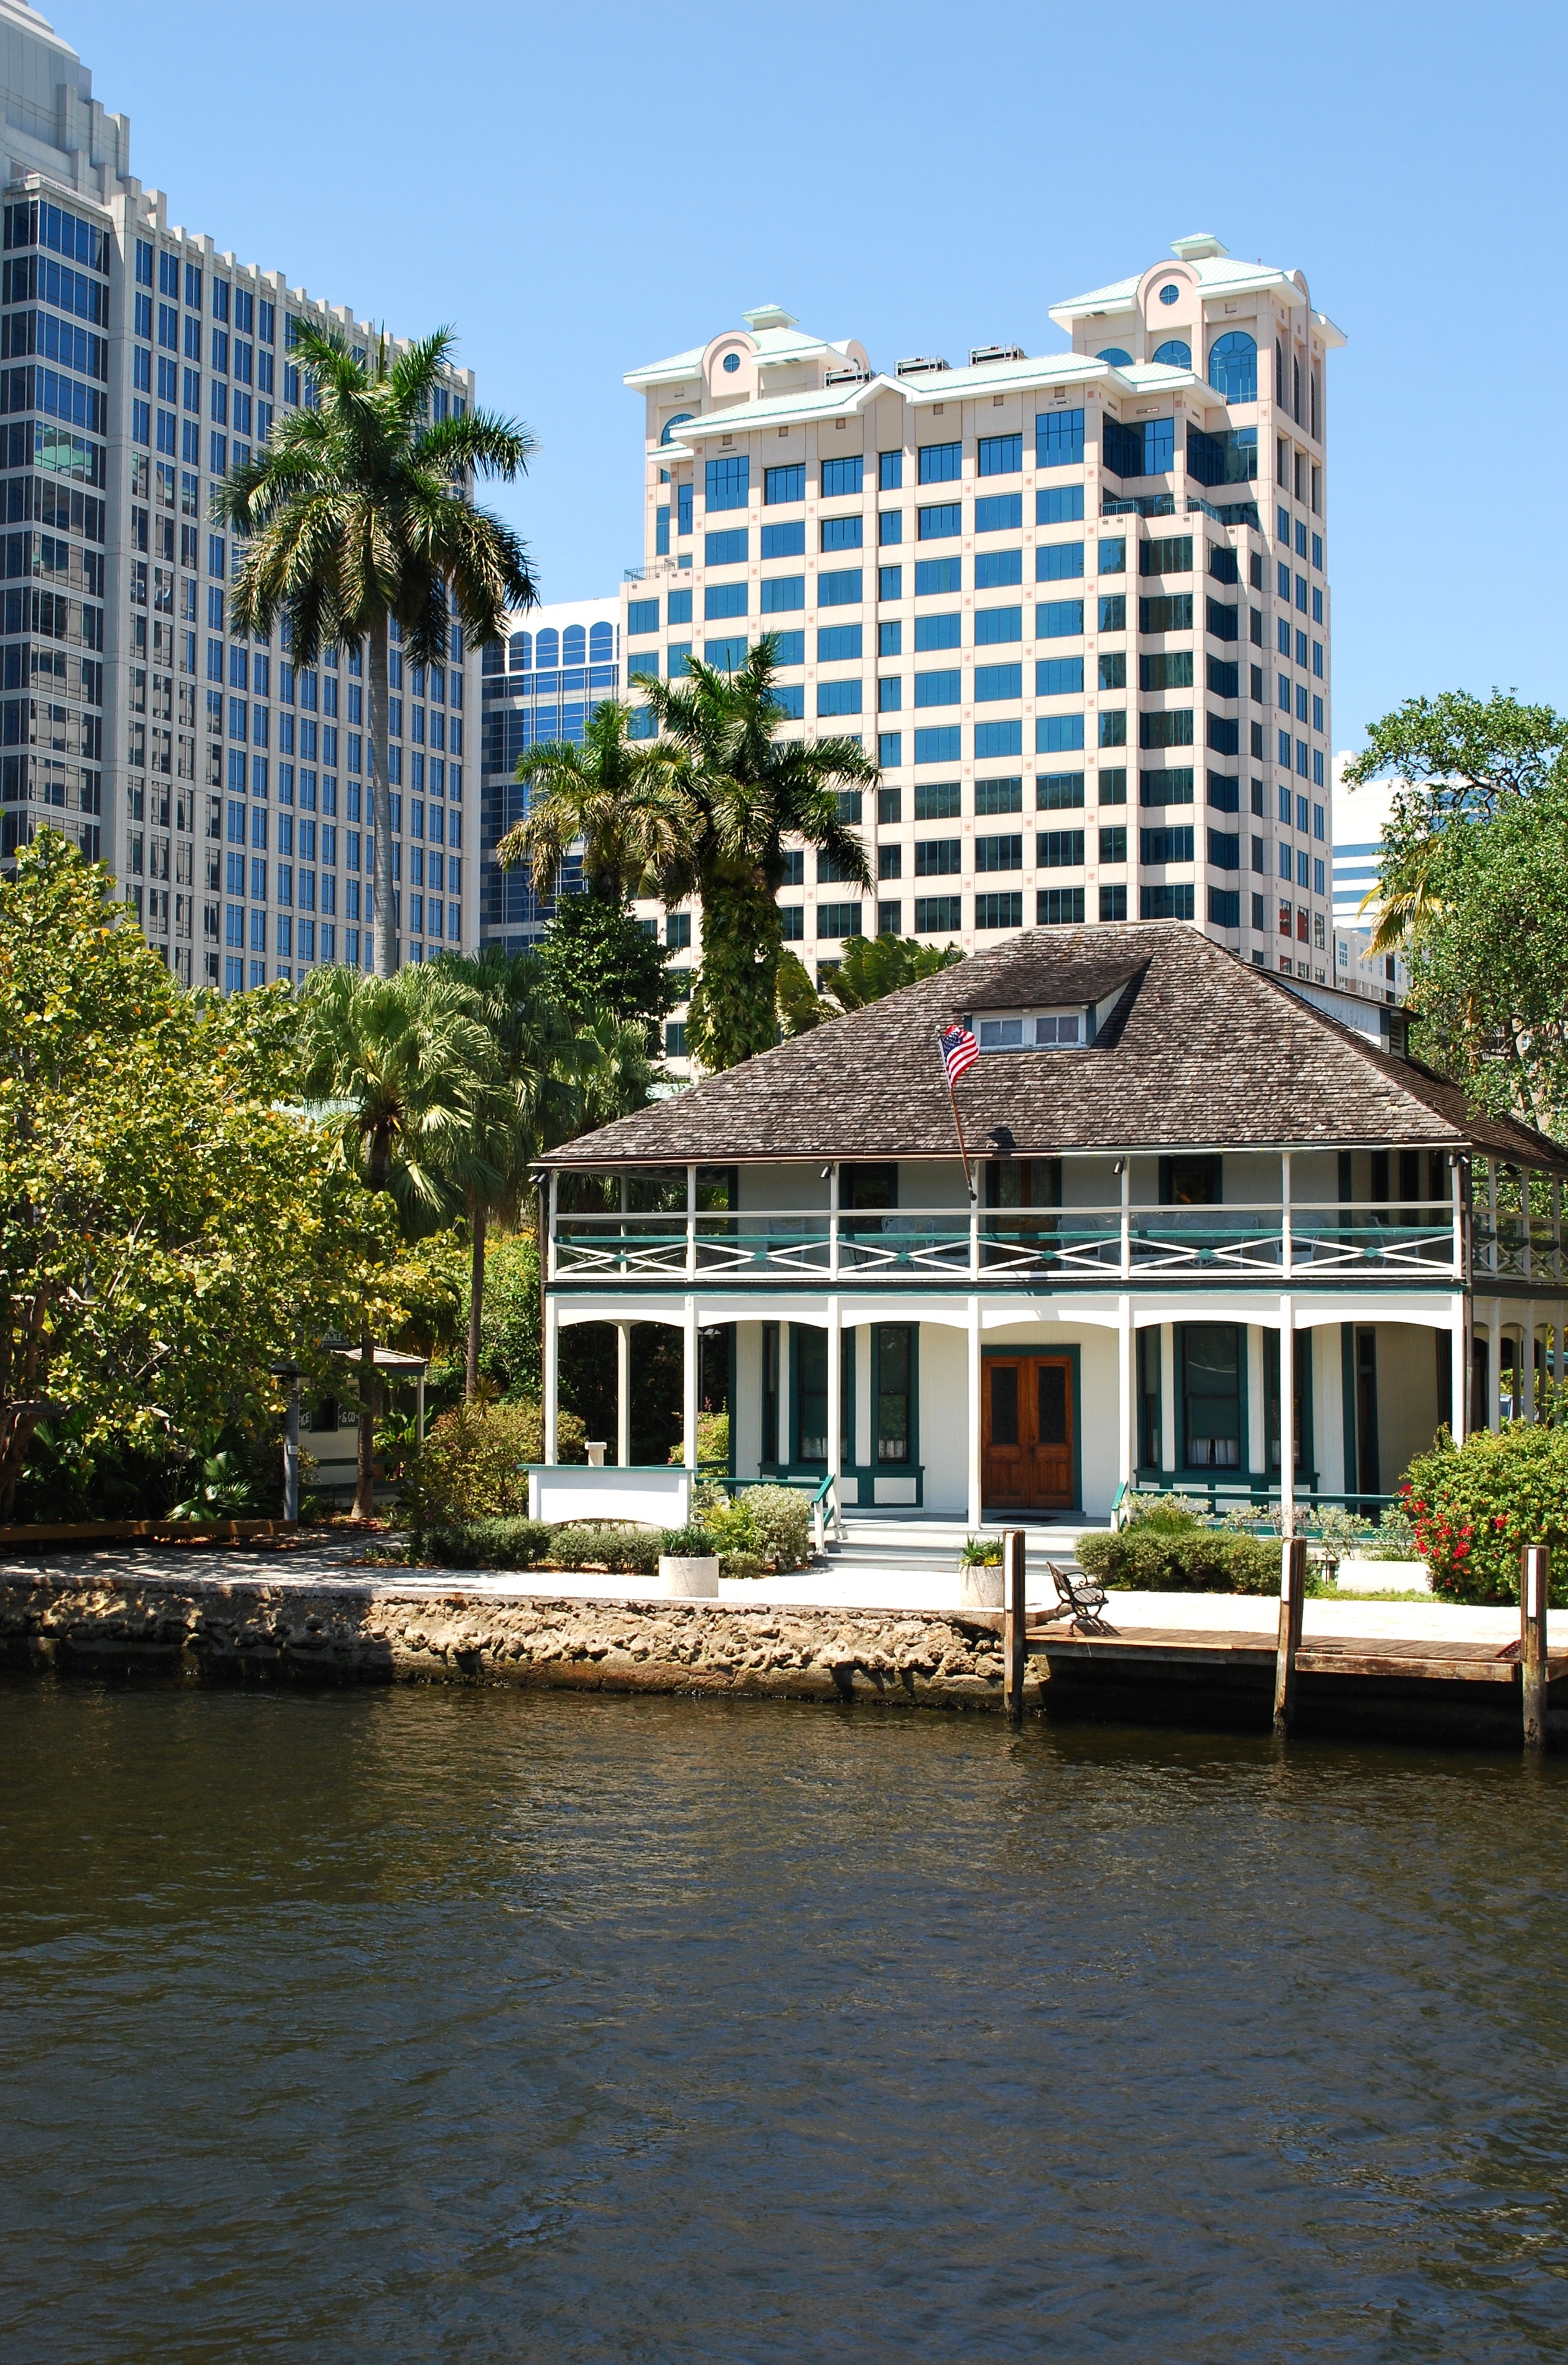 Historic Stranahan House Museum, Fort Lauderdale, Florida, United States of America